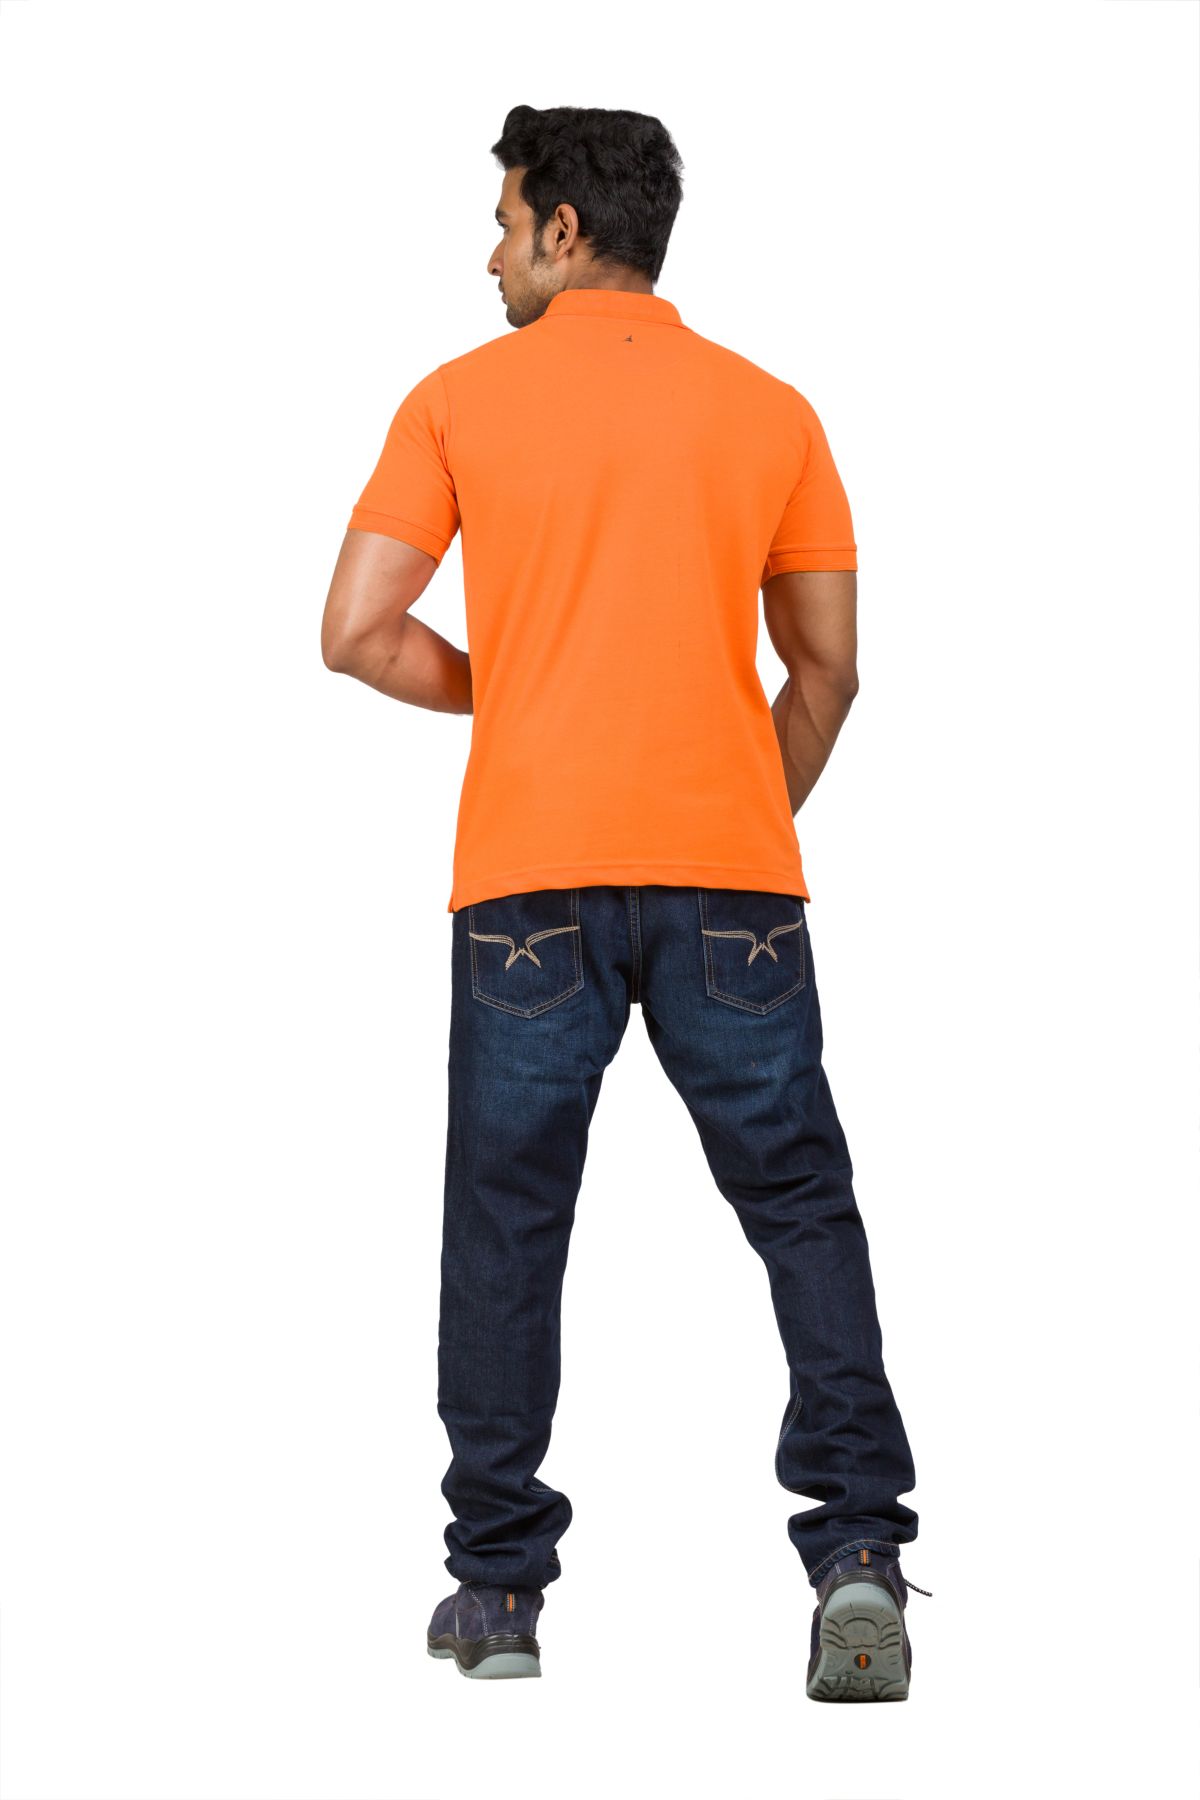 Regular Fit Half Sleeve Orange Polo is made of comfortable, cotton blend pique fabric. Suitable for office or for any casual day